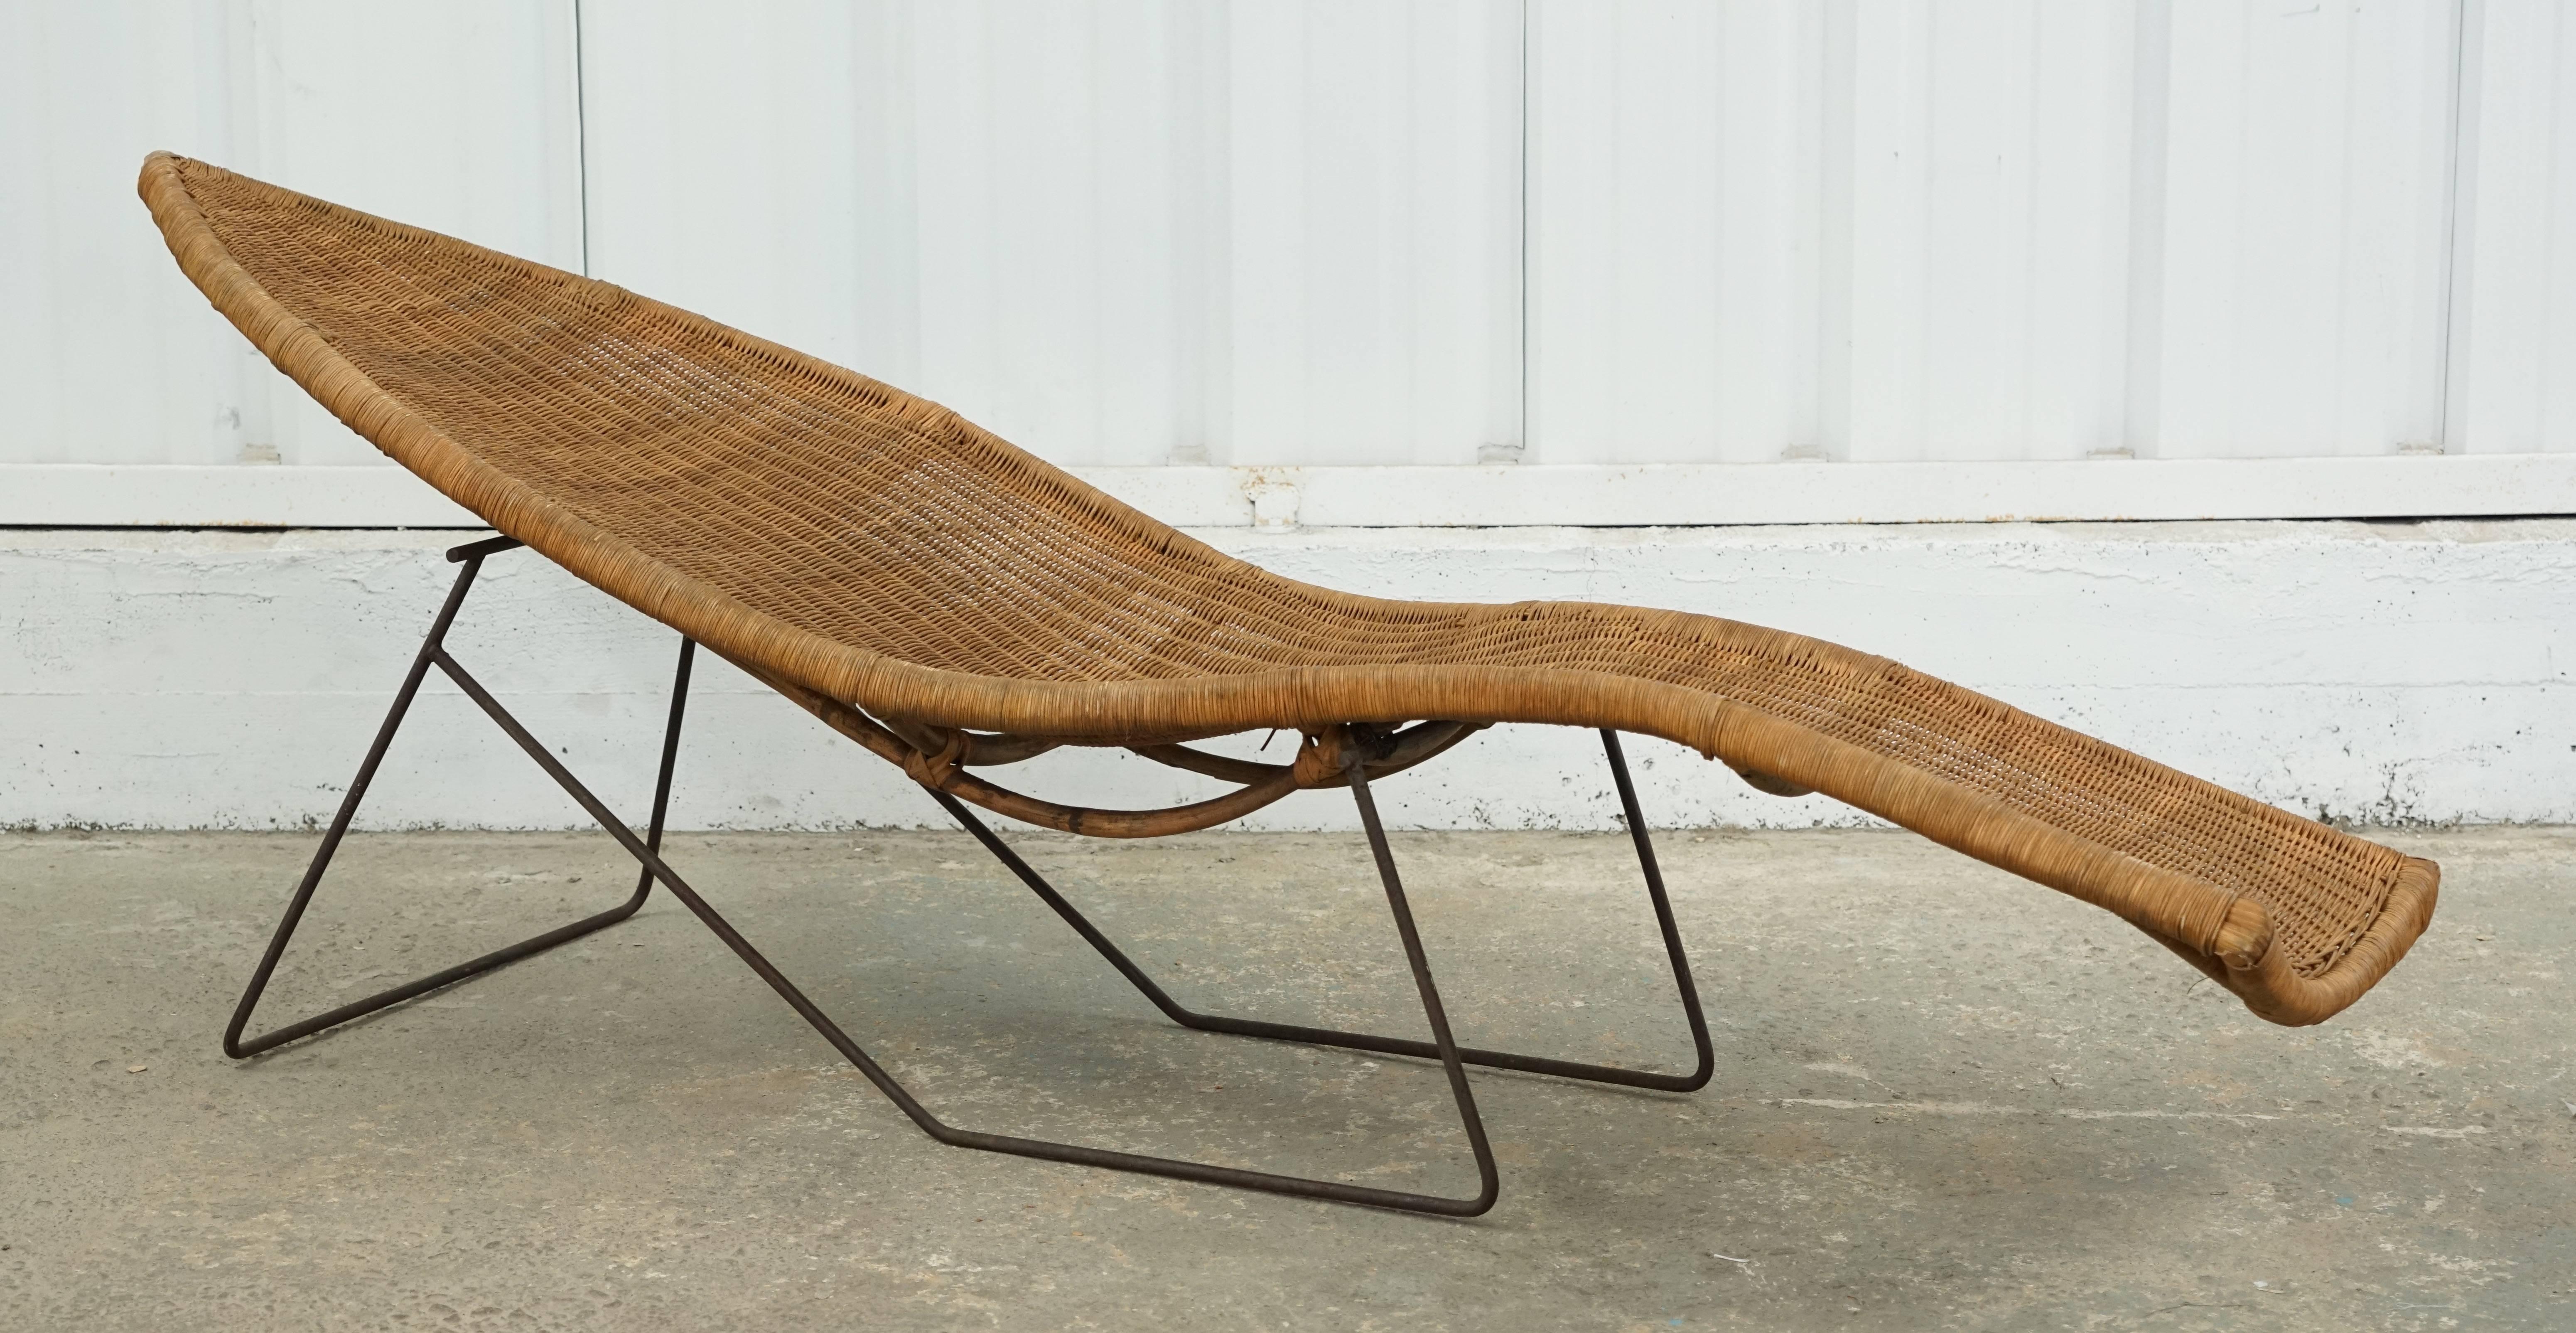 Fabulous vintage John Salterini wicker chaise that forms the shape of a fish! A retro Classic.